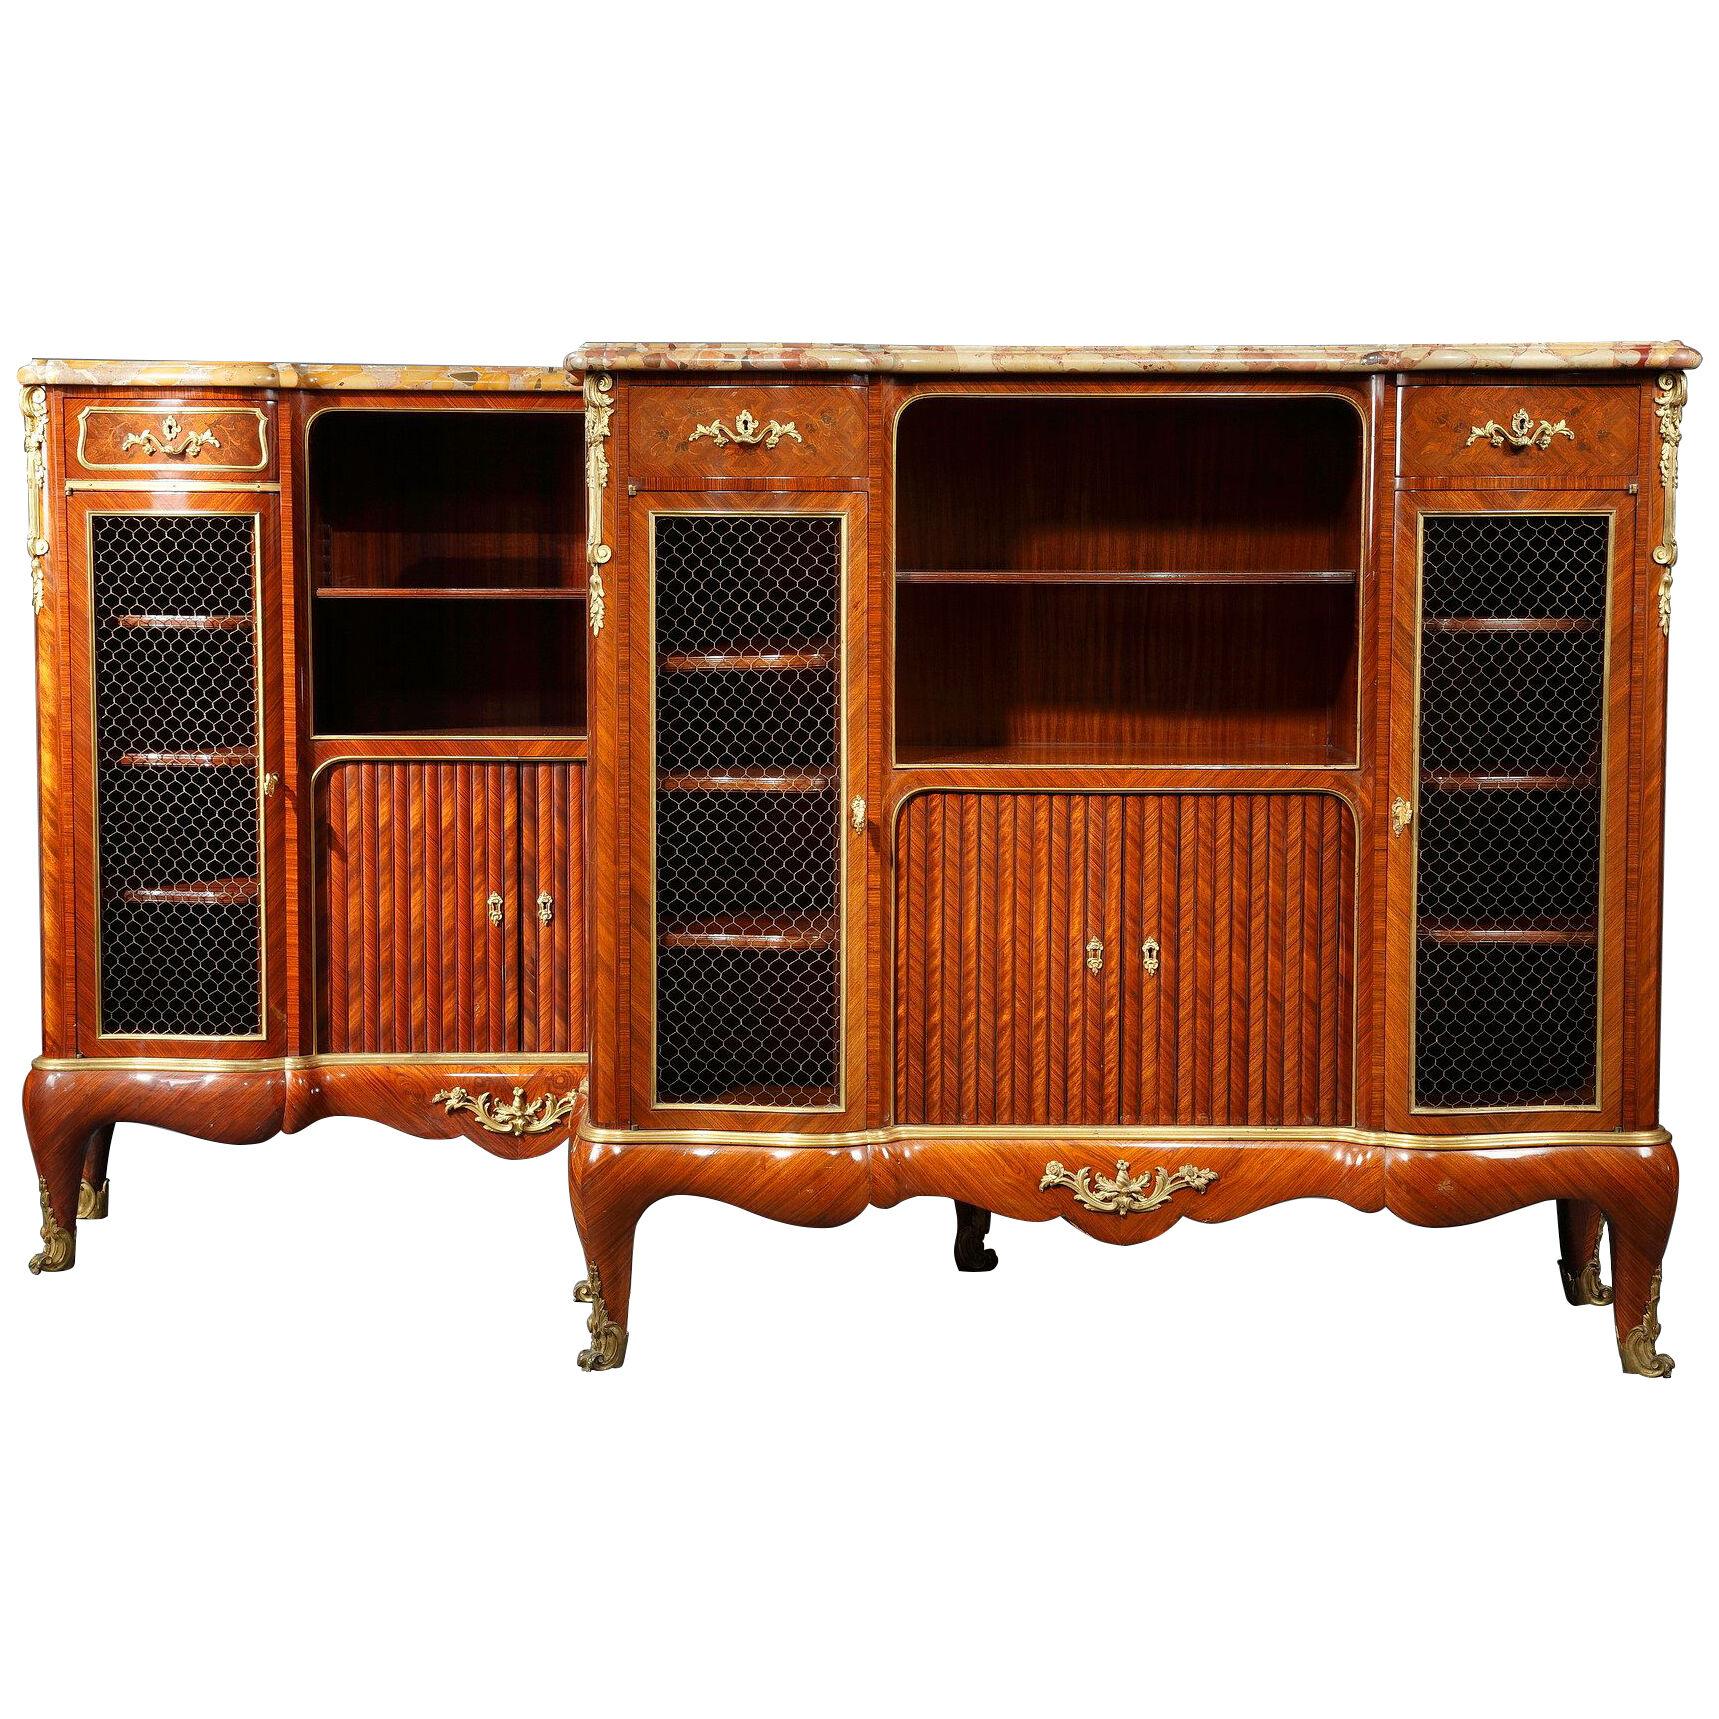 Near Pair of Bookcase-Cabinets by P. Sormani, France, Circa 1870